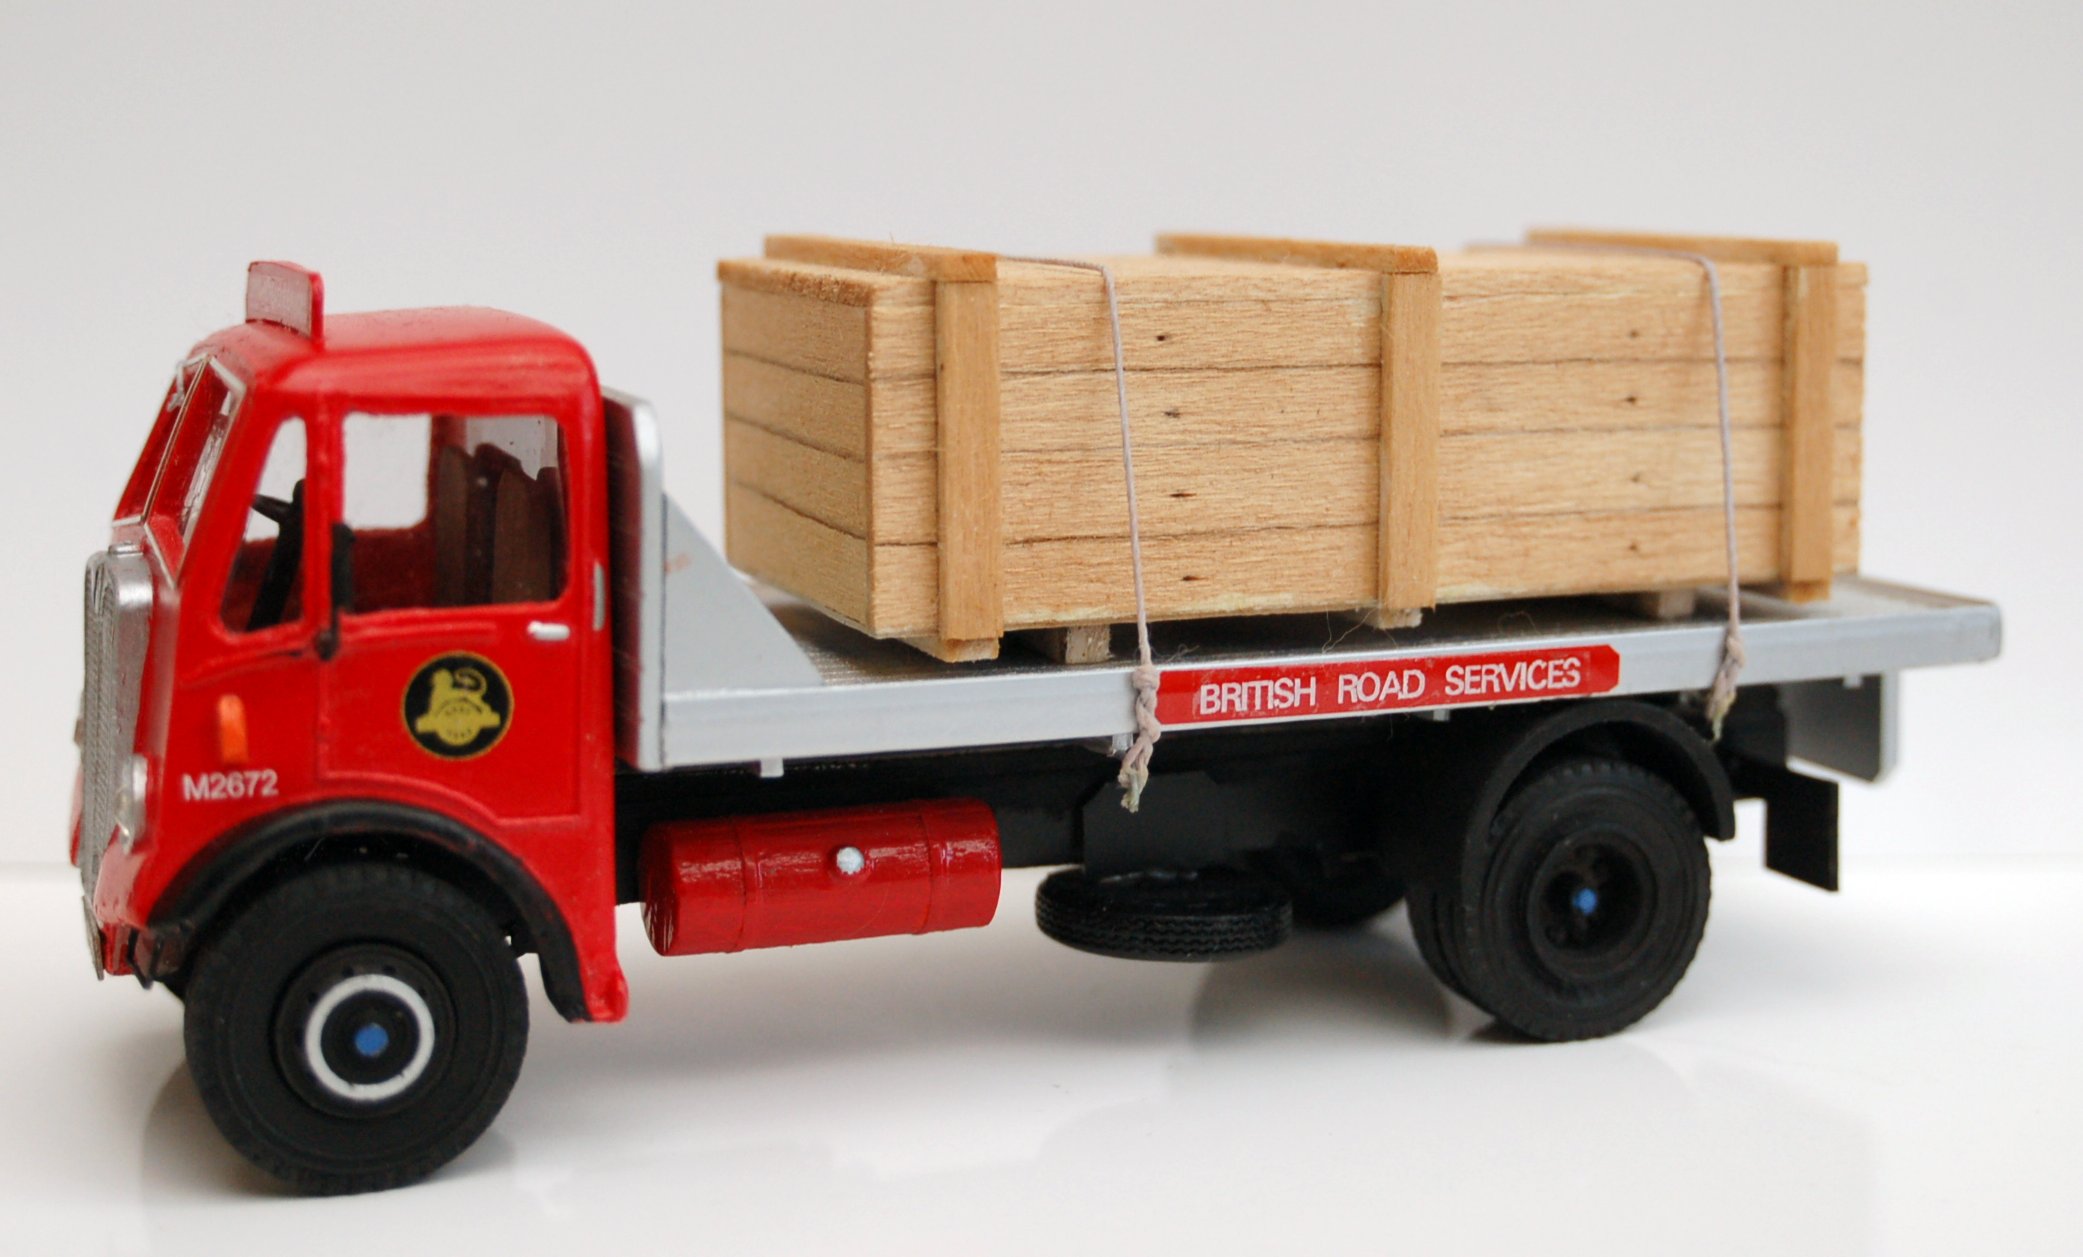 AEC Monarch BRS Truck | Flickr - Photo Sharing!